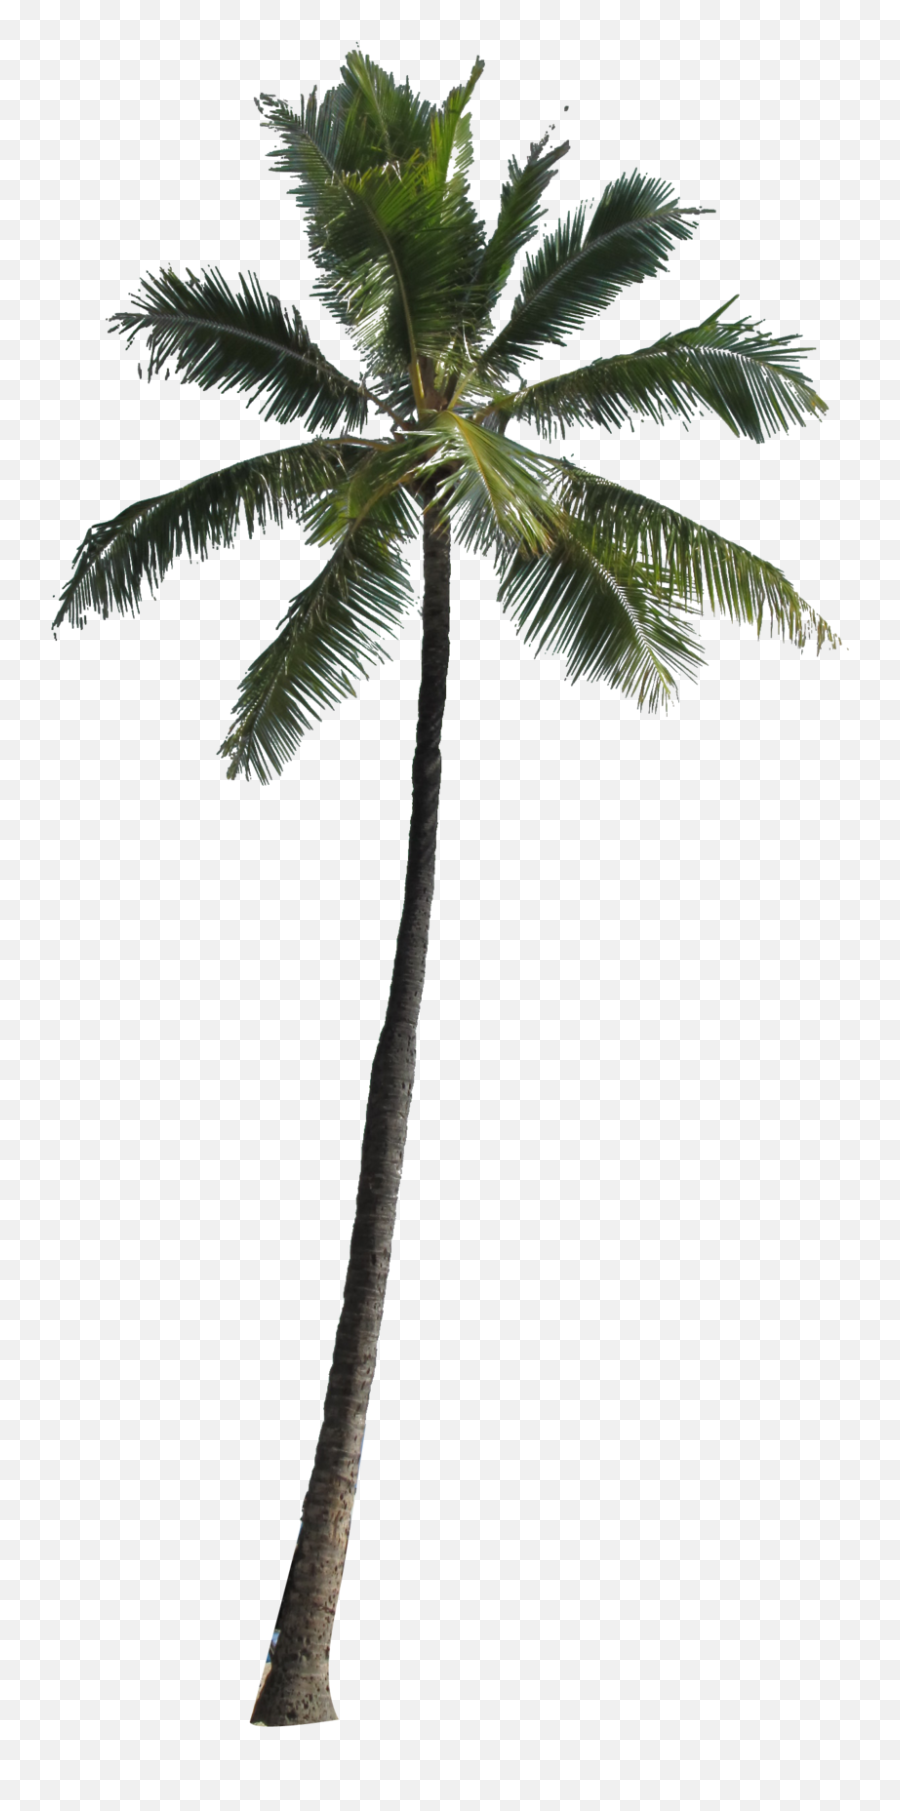 Palm Tree Png Image - Palm Tree Transparent Background,Palm Png